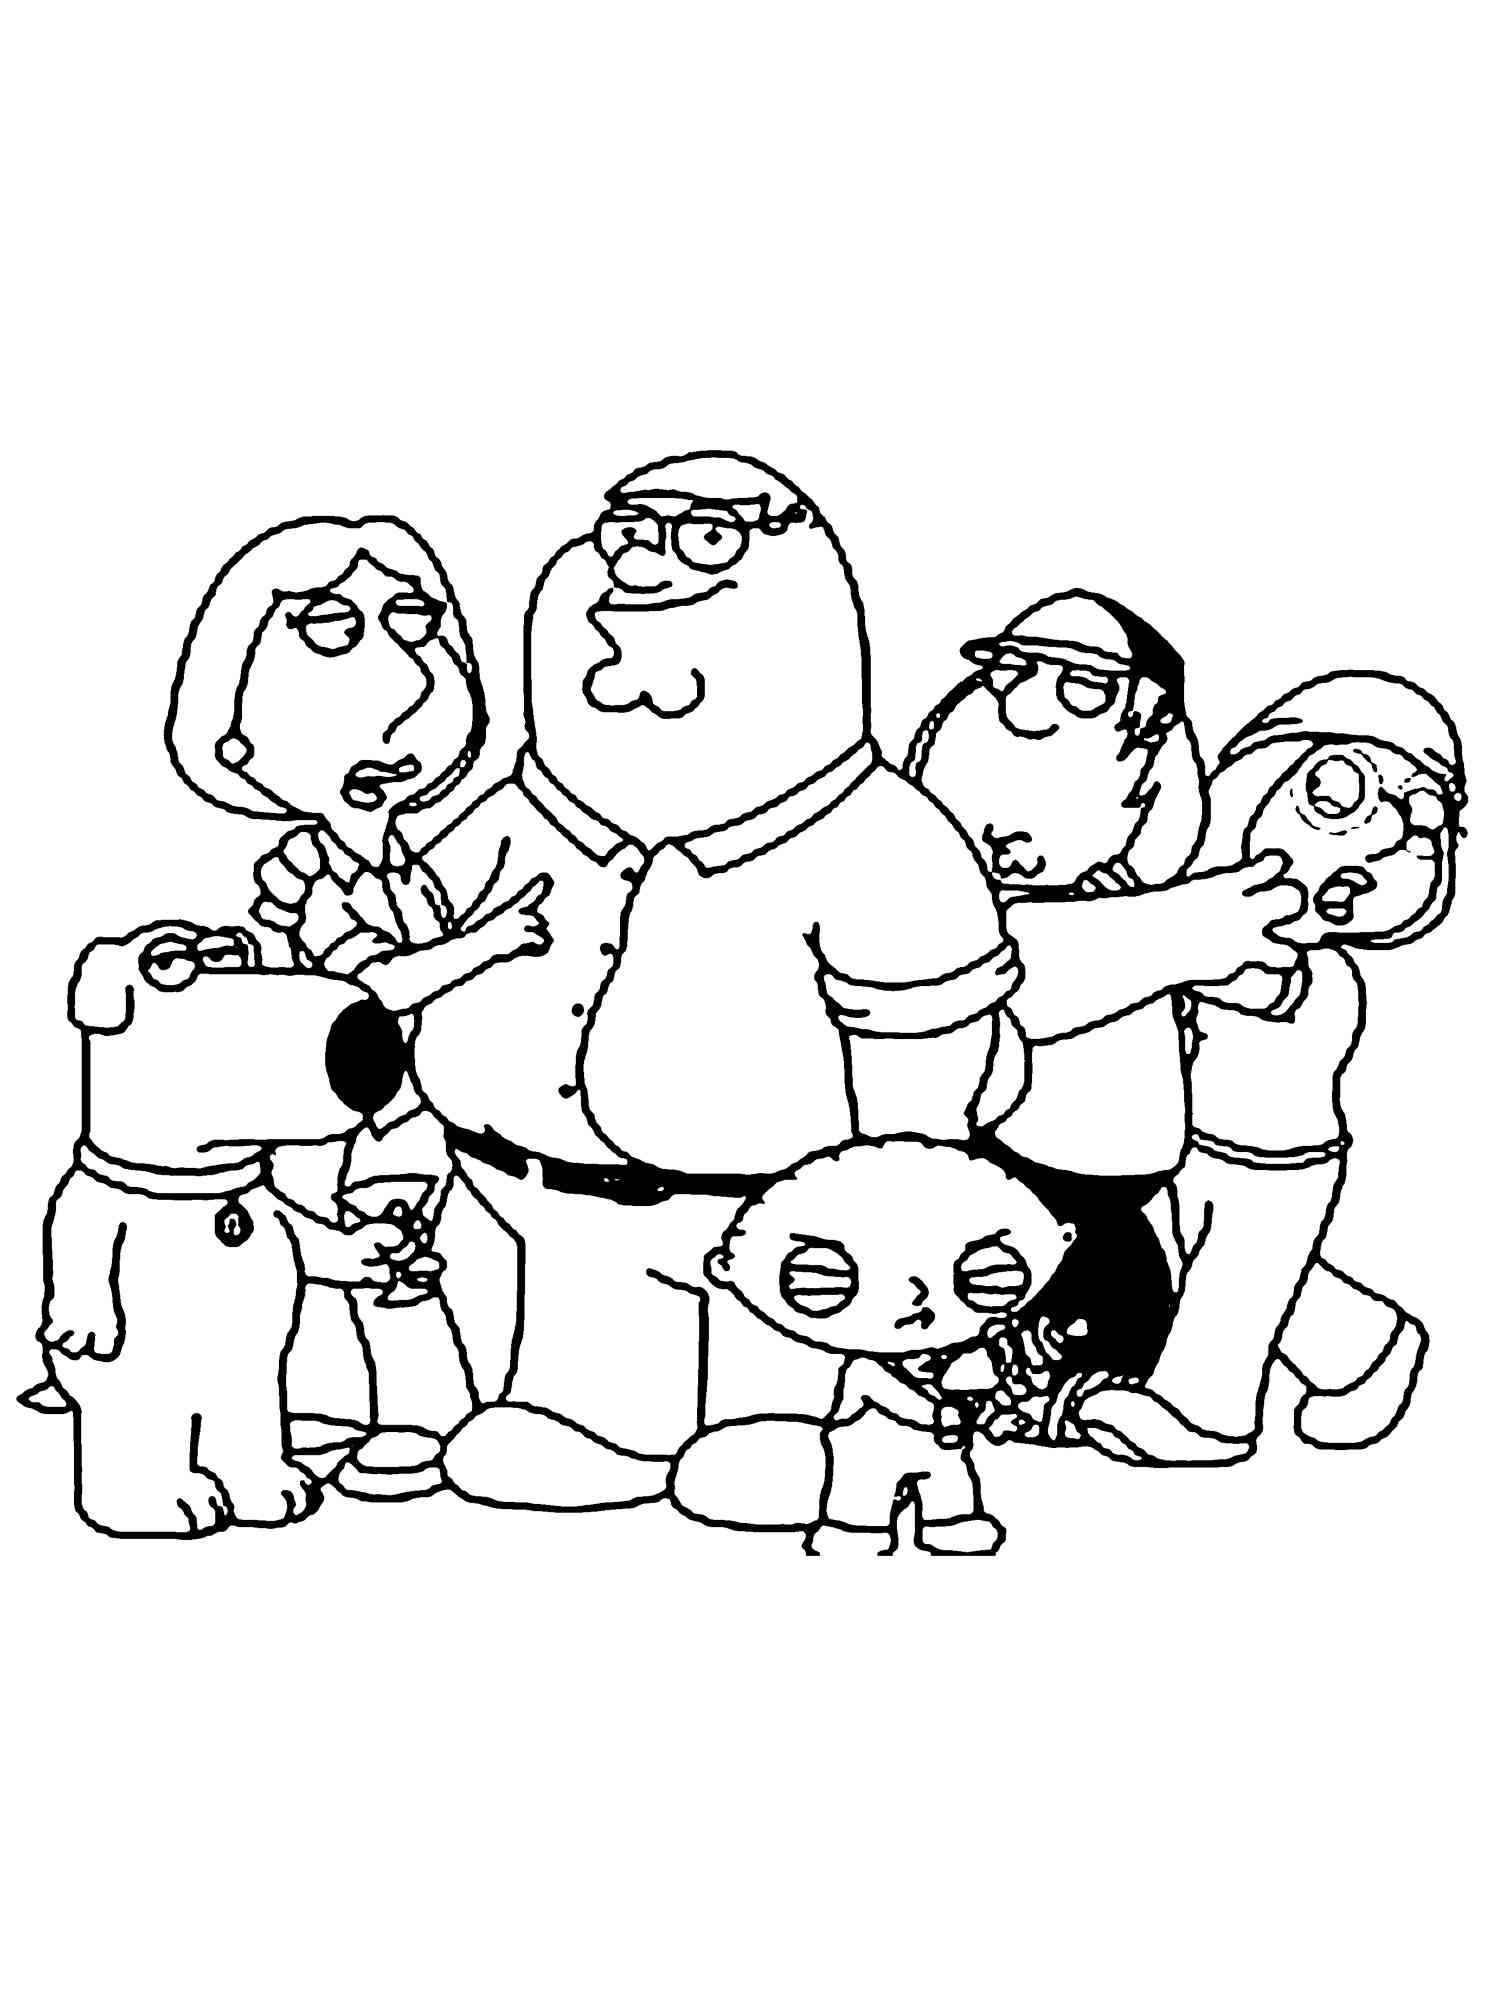 Family Guy 30 coloring page